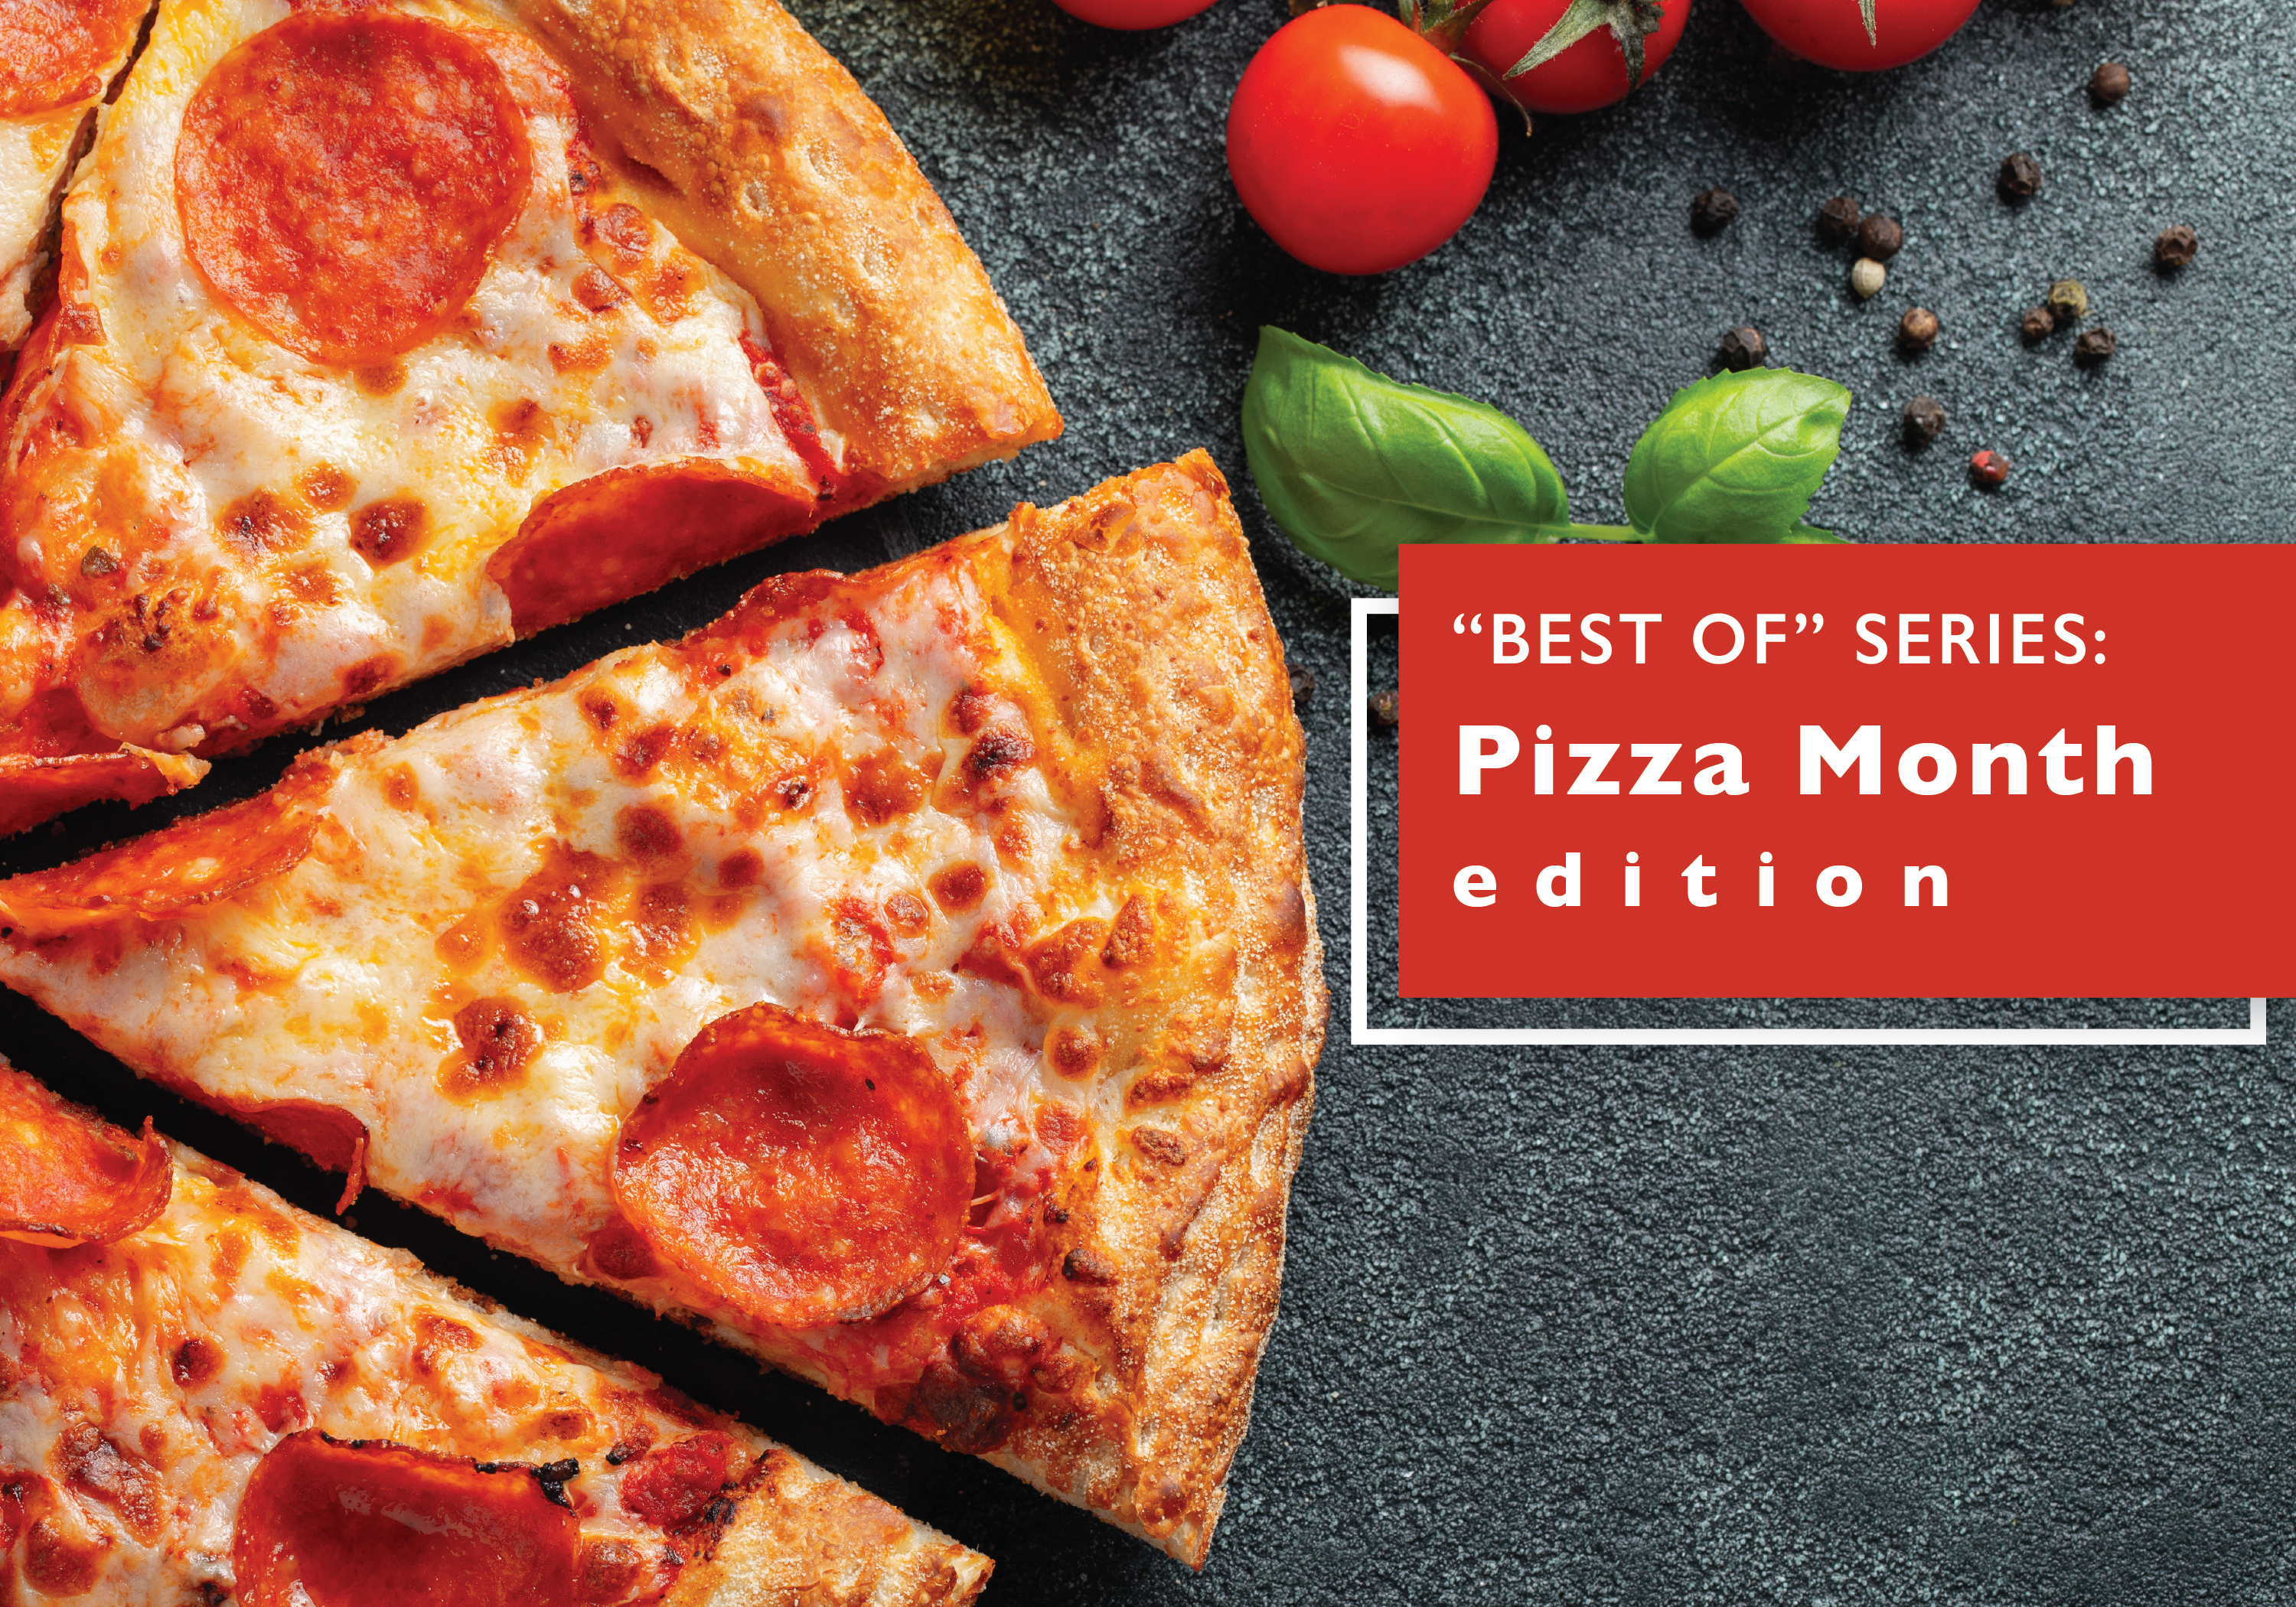 Best of Series: #RideDCTA to the Best Slice During #NationalPizzaMonth